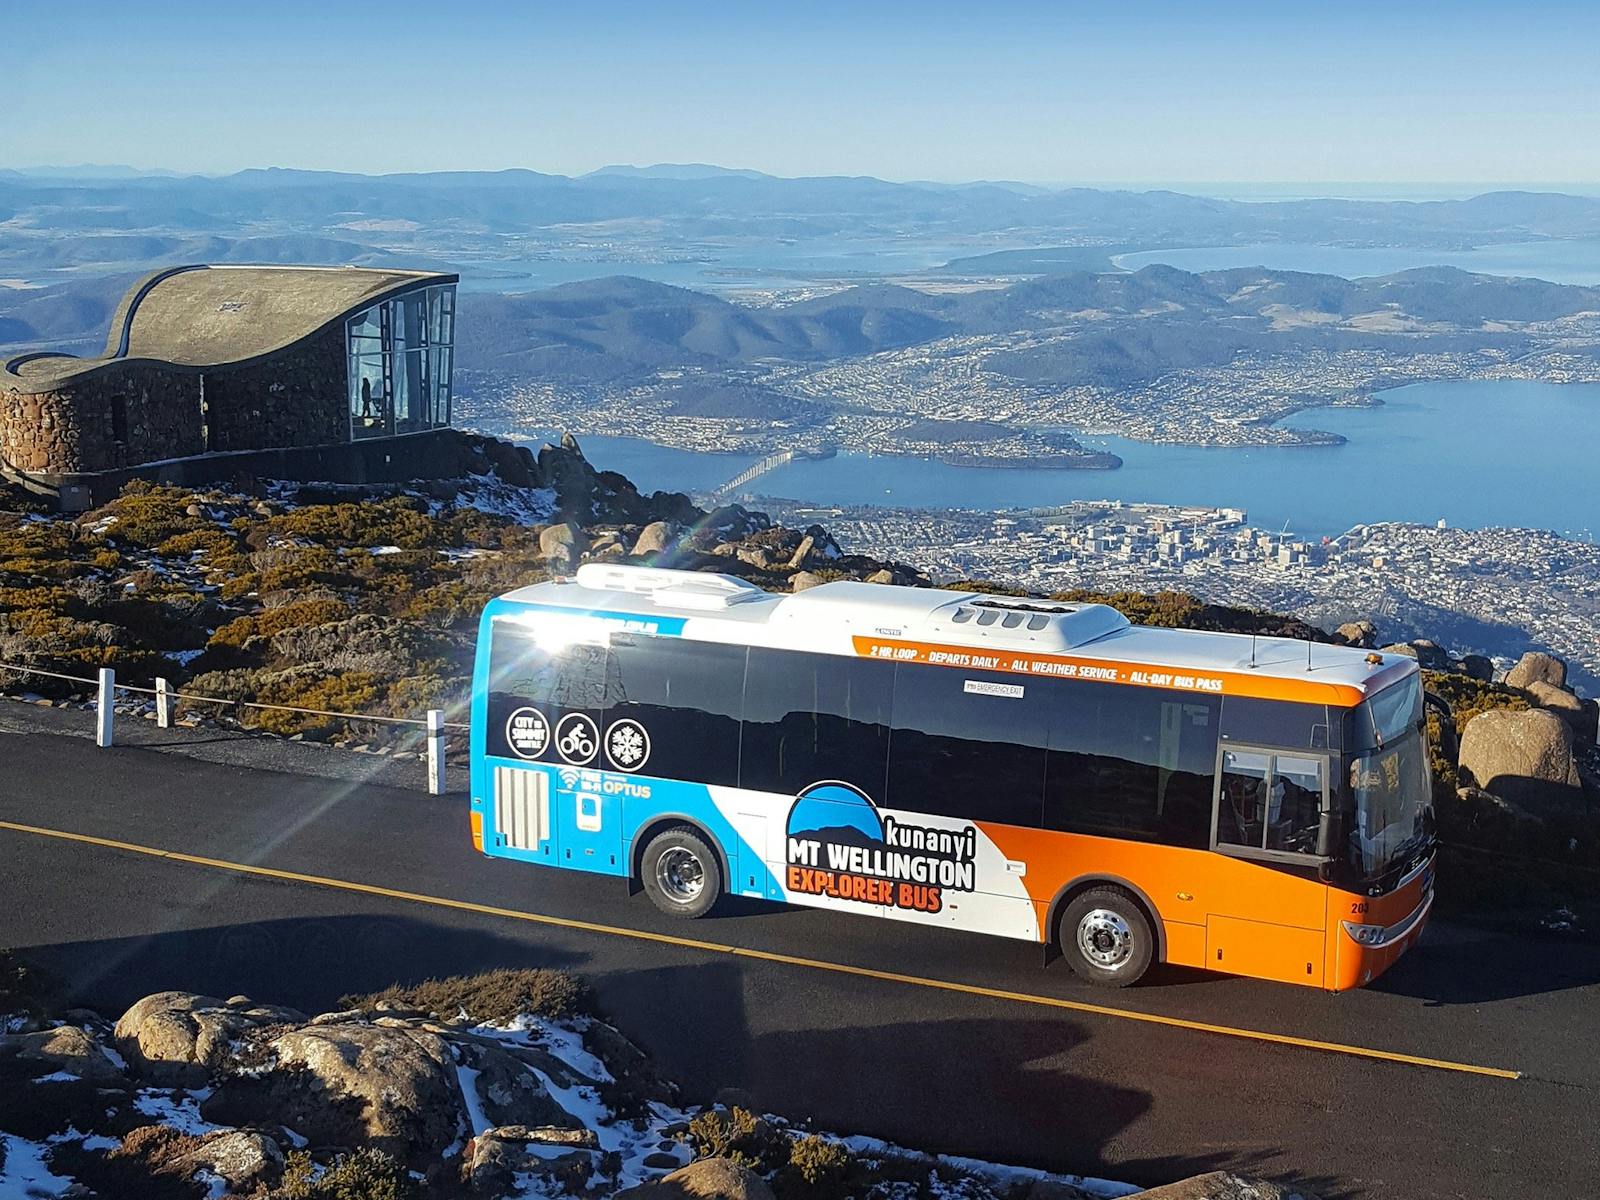 Shuttle bus at the summit of kunanyi/Mt Wellington. Spectacular views over Hobart.